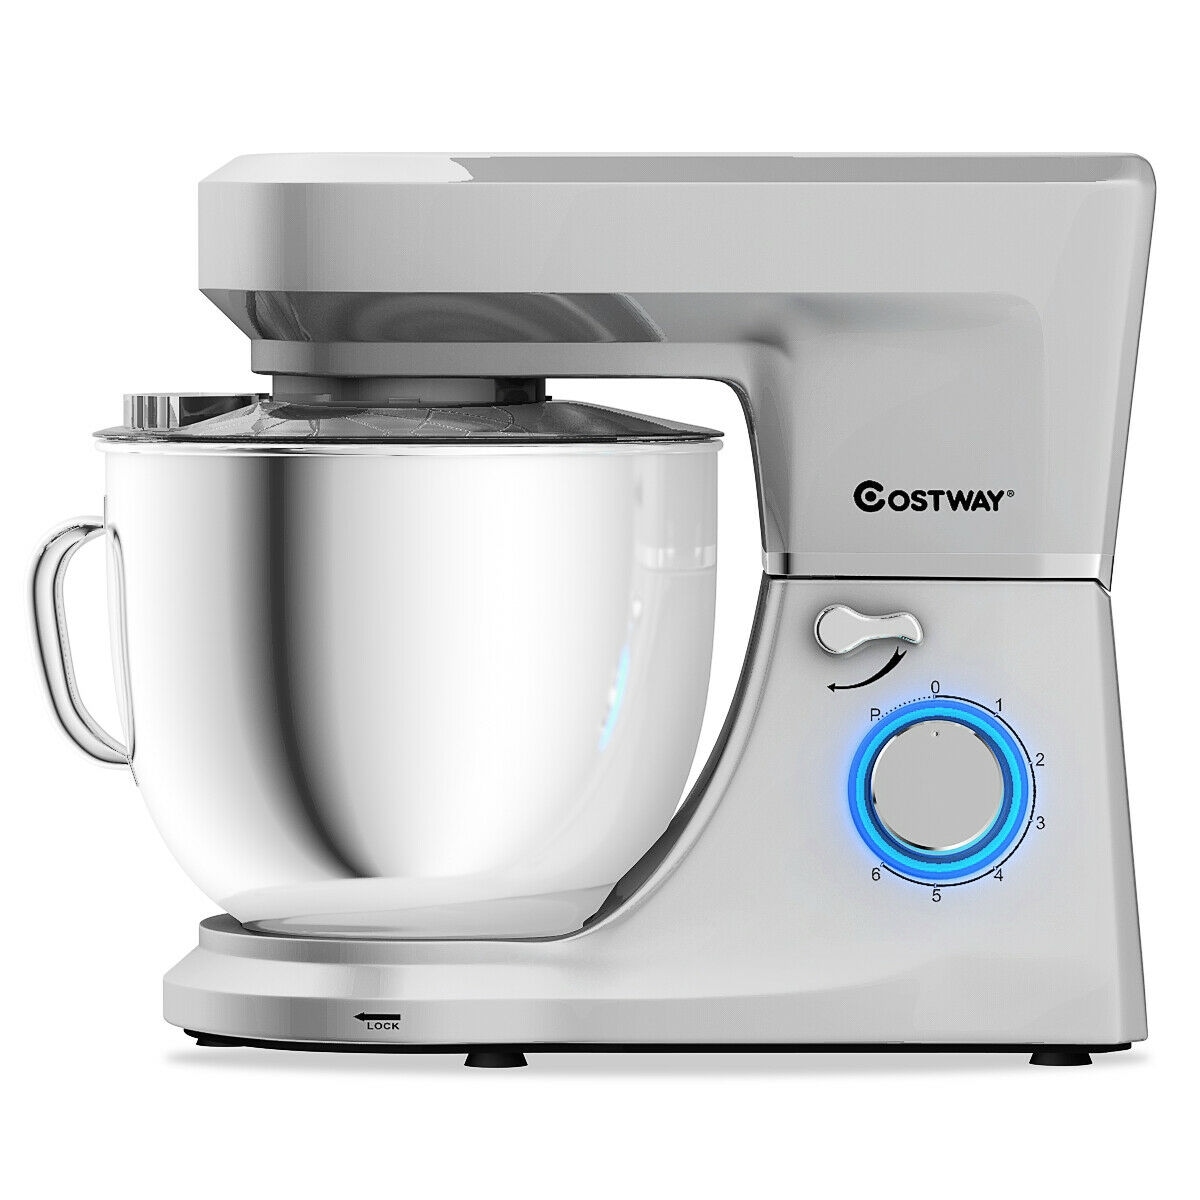 CASAINC 7.5 Qt Mixer In White with Dough Hook in Stand Mixers department at Lowes.com